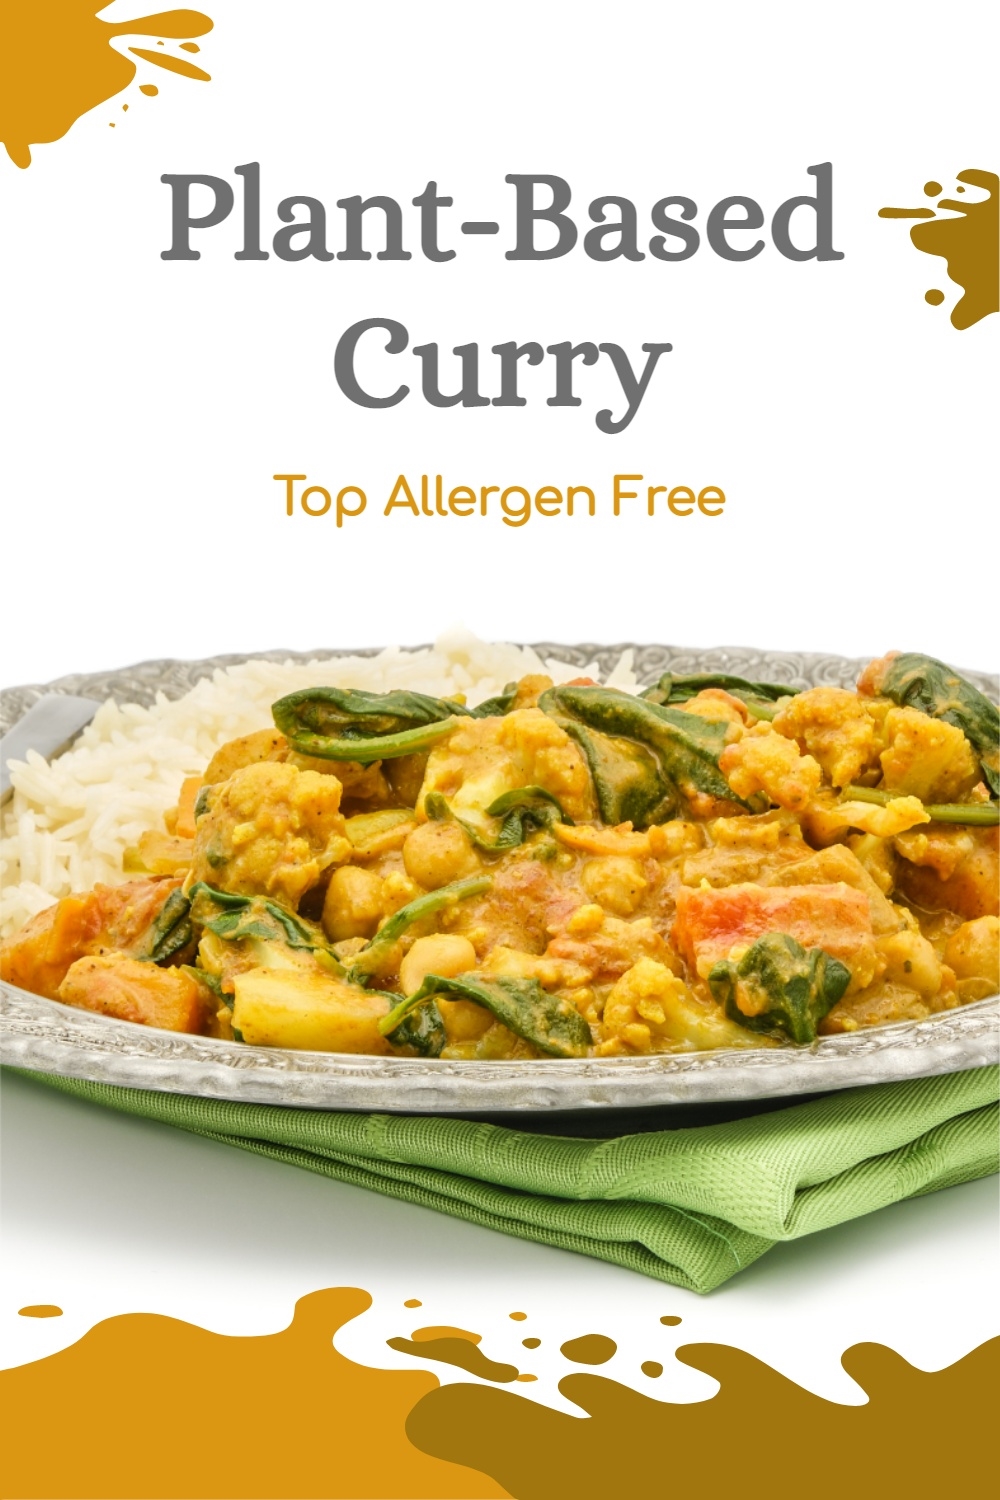 Pics Plant Based Curry Writing 